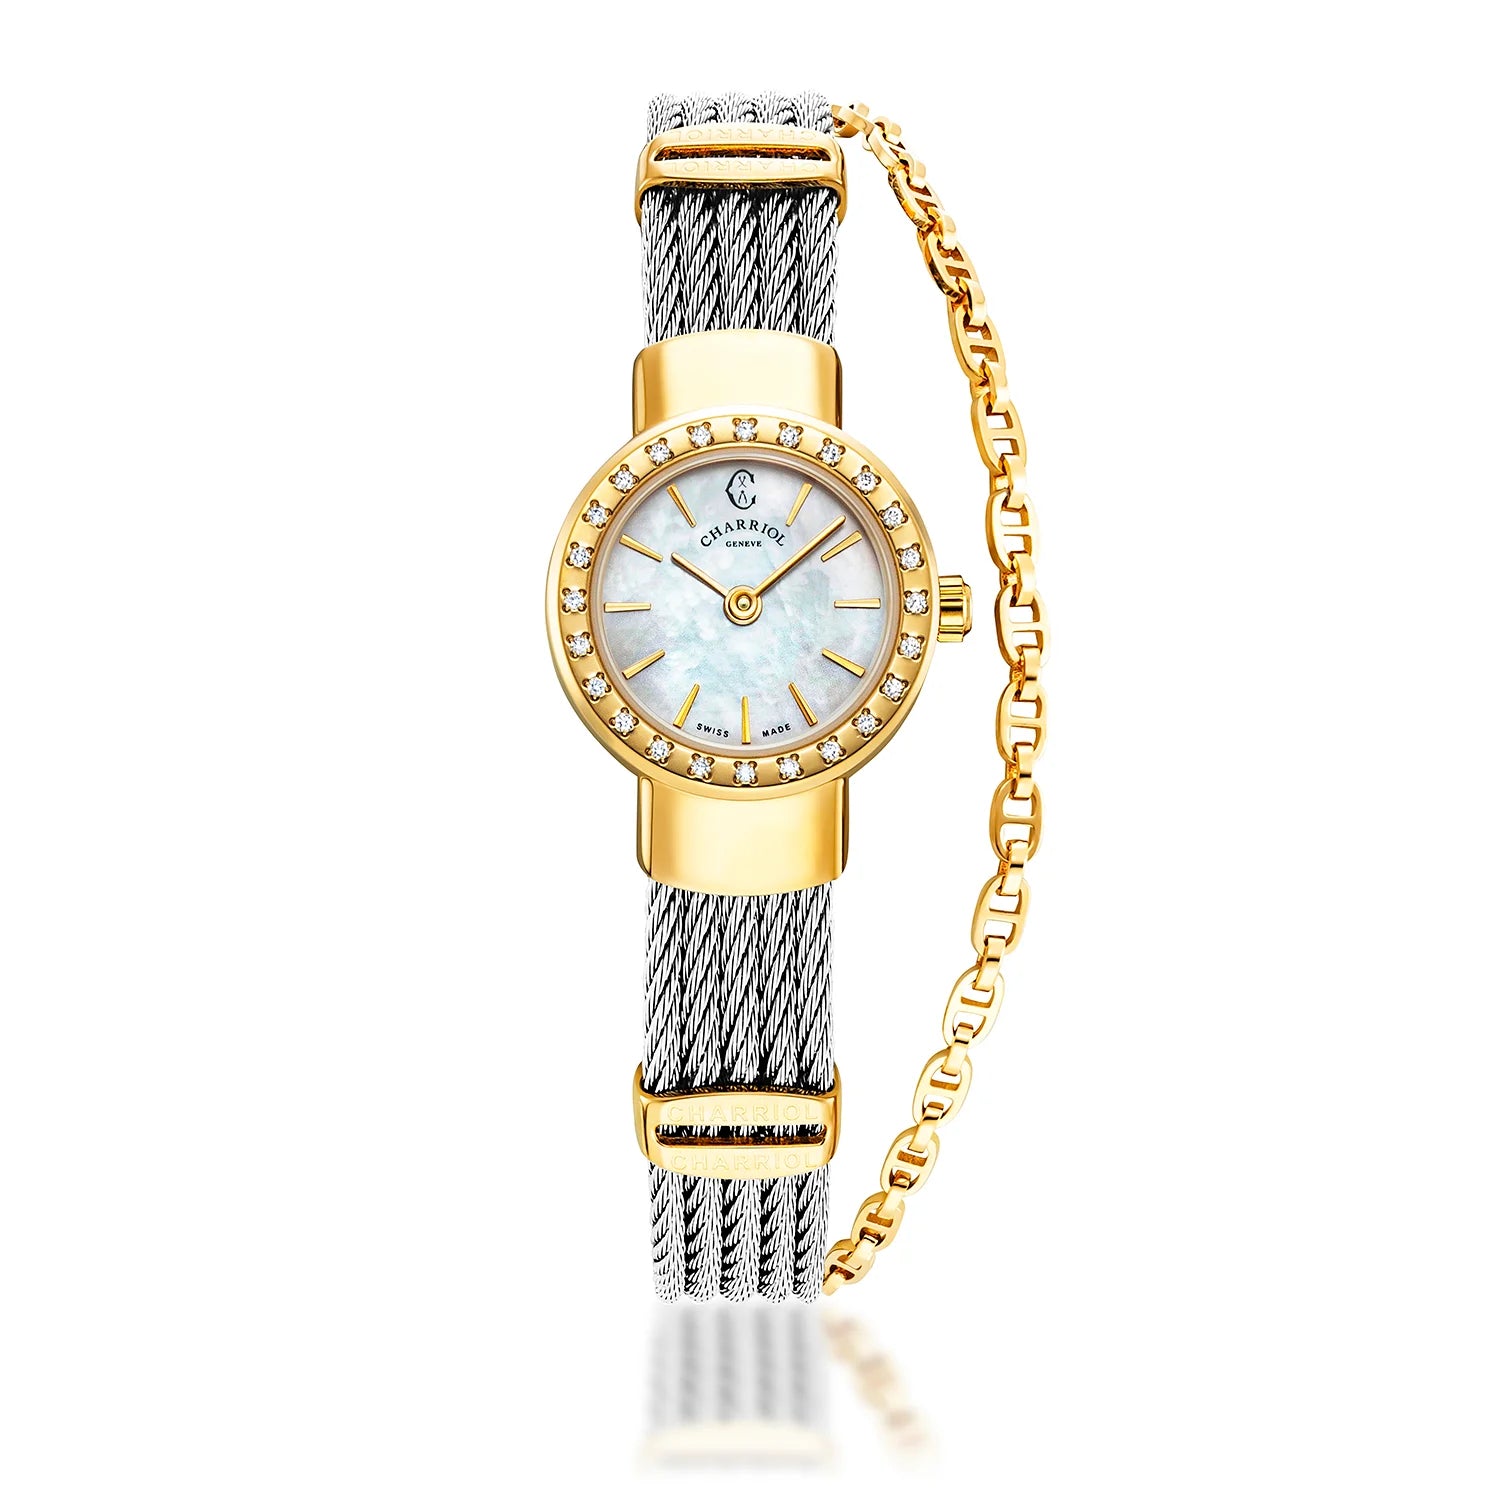 ST TROPEZ, 20MM, QUARTZ CALIBRE, MOTHER-OF-PEARL DIAL, YELLOW GOLD PVD WITH 24 DIAMONDS BEZEL, STEEL CABLE BRACELET - Charriol Geneve -  Watch